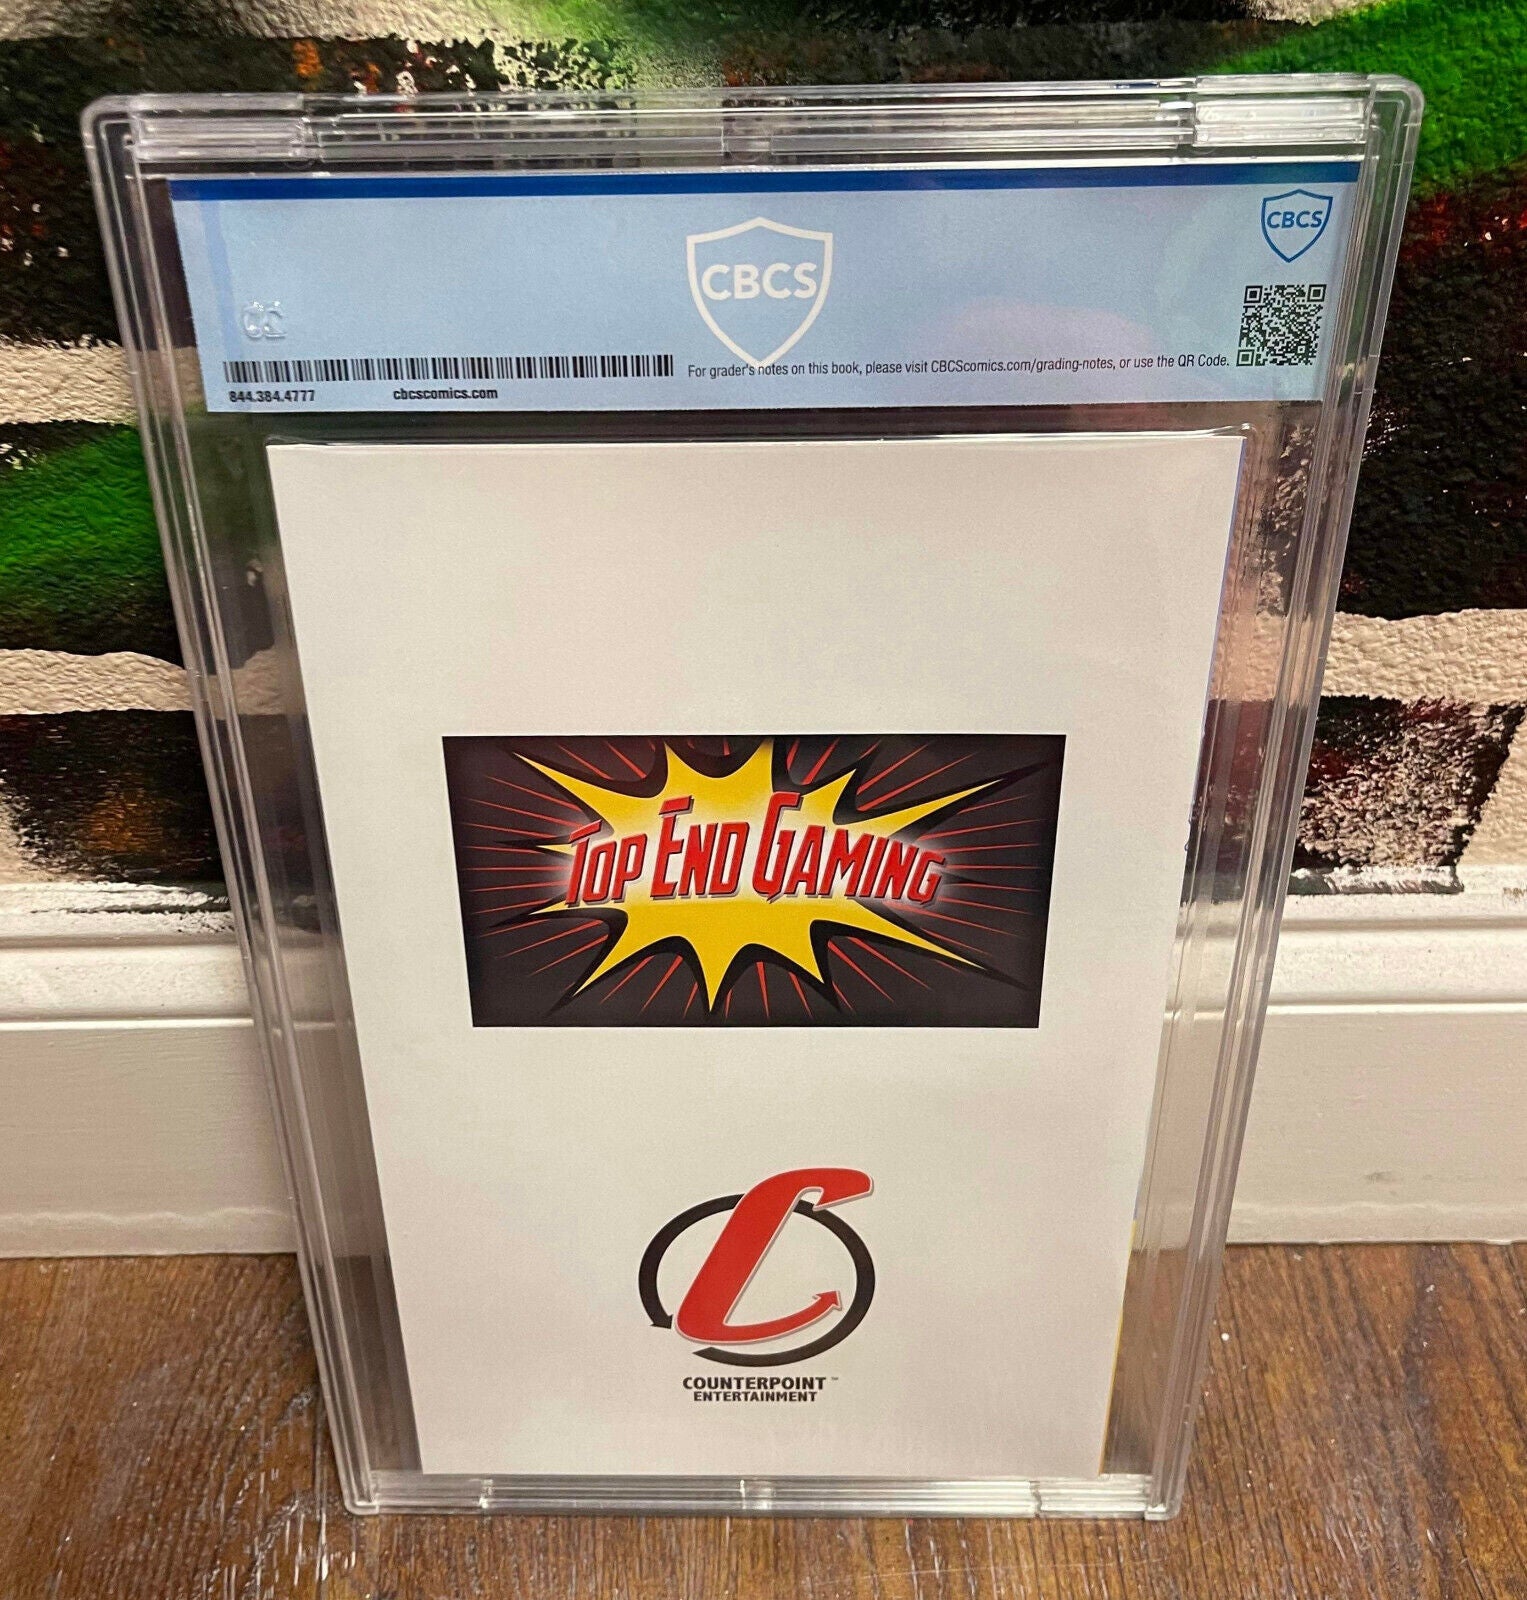 Do You Poo #nn Counterpoint 2019 Top End Gaming Virgin Exclusive CBCS 9.8